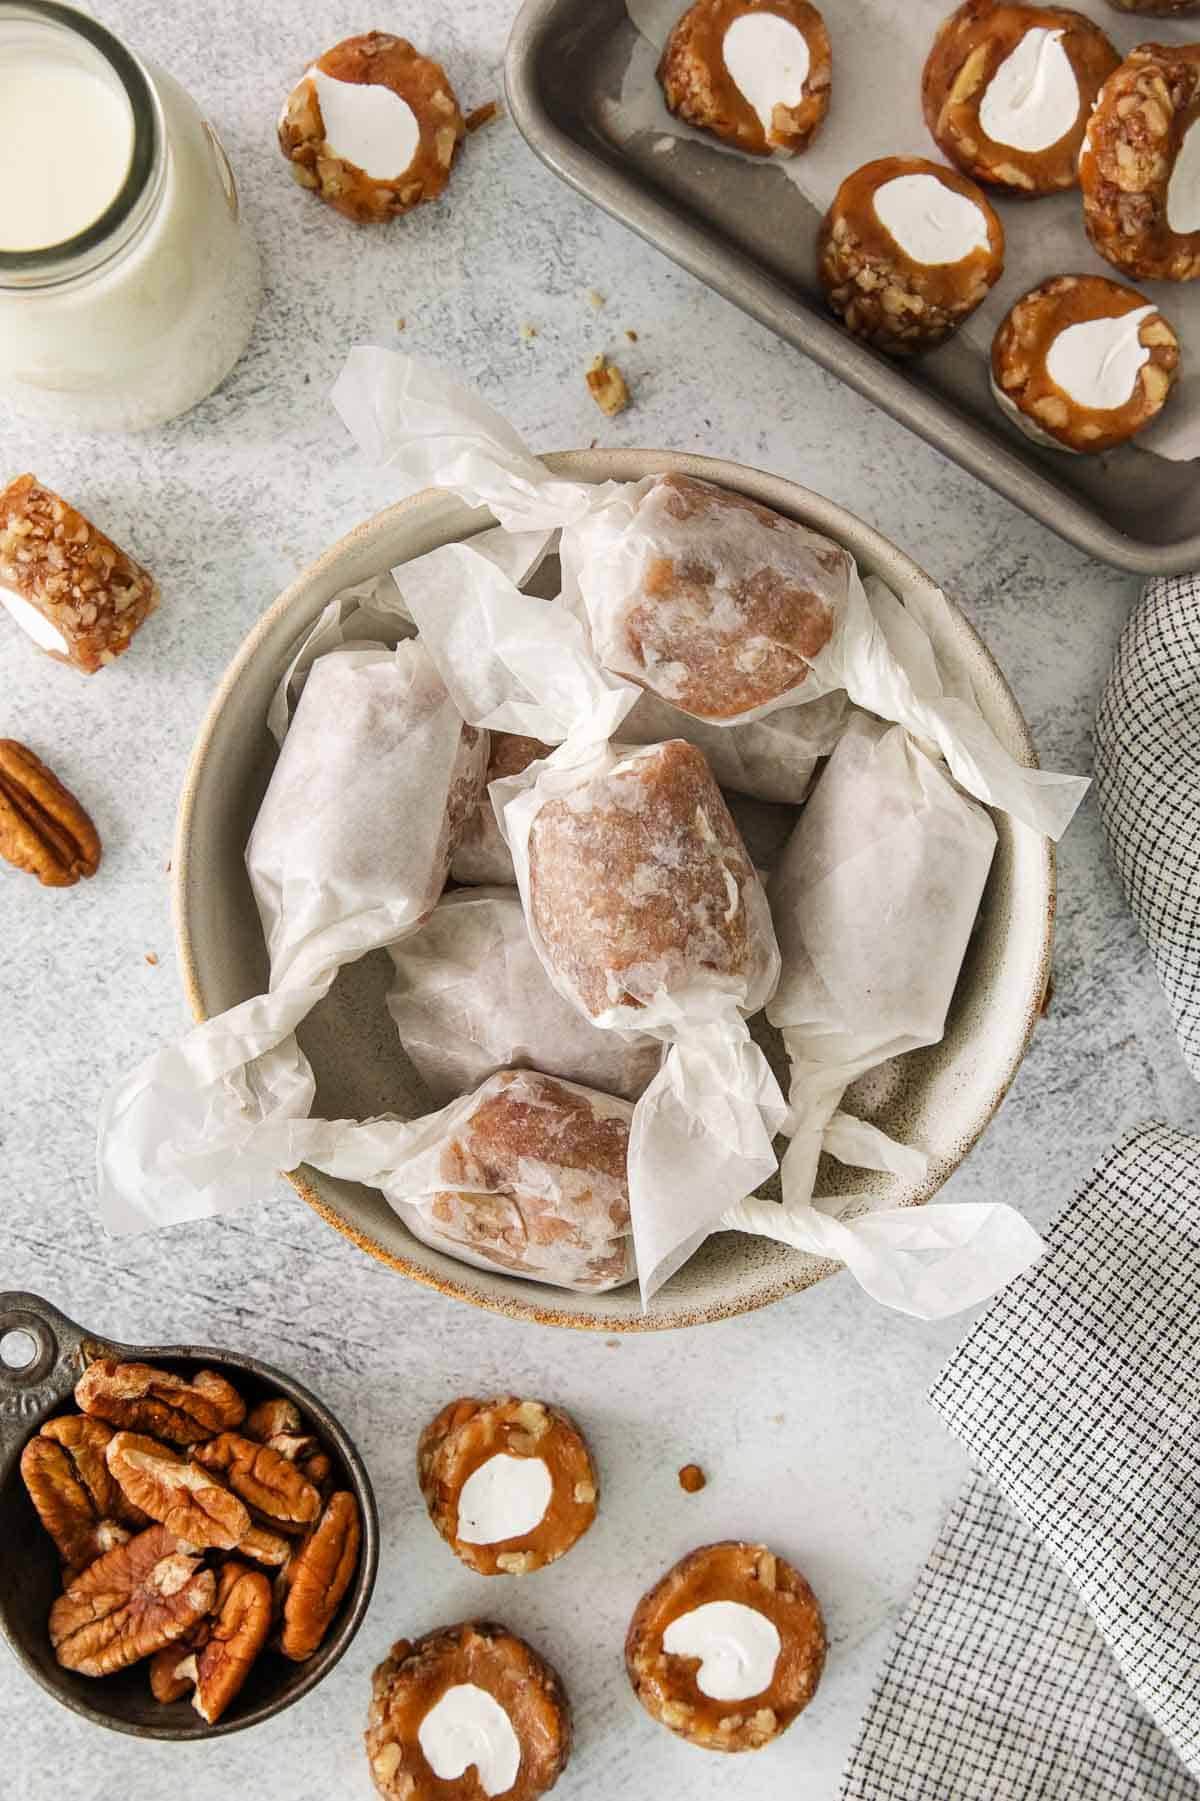 Pecan roll pieces rolled up in wax paper and placed in a bowl